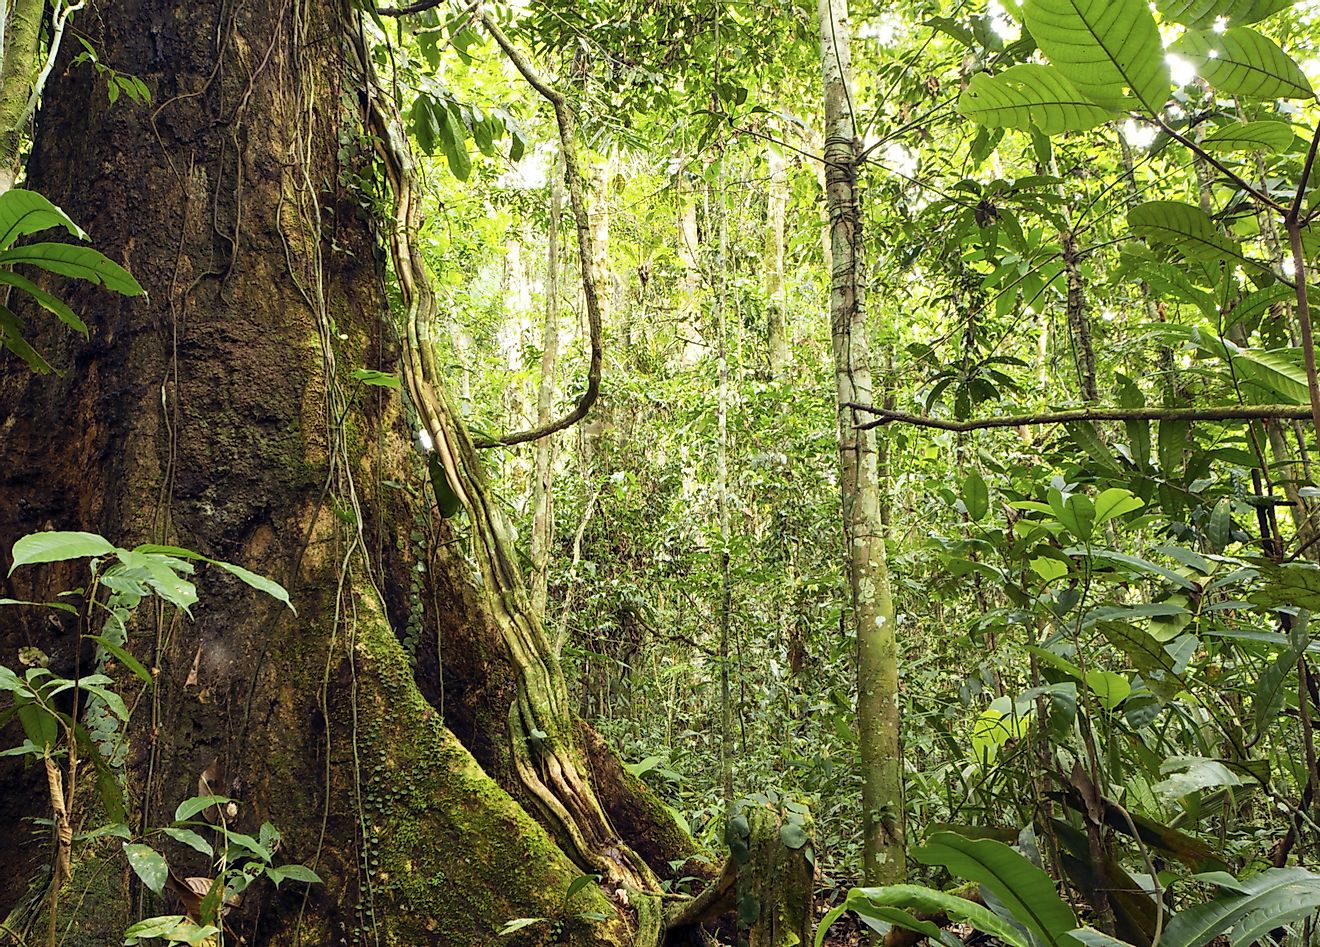 As in most parts of the world listed herein, Ecuador's flora is most threatened by human activities.